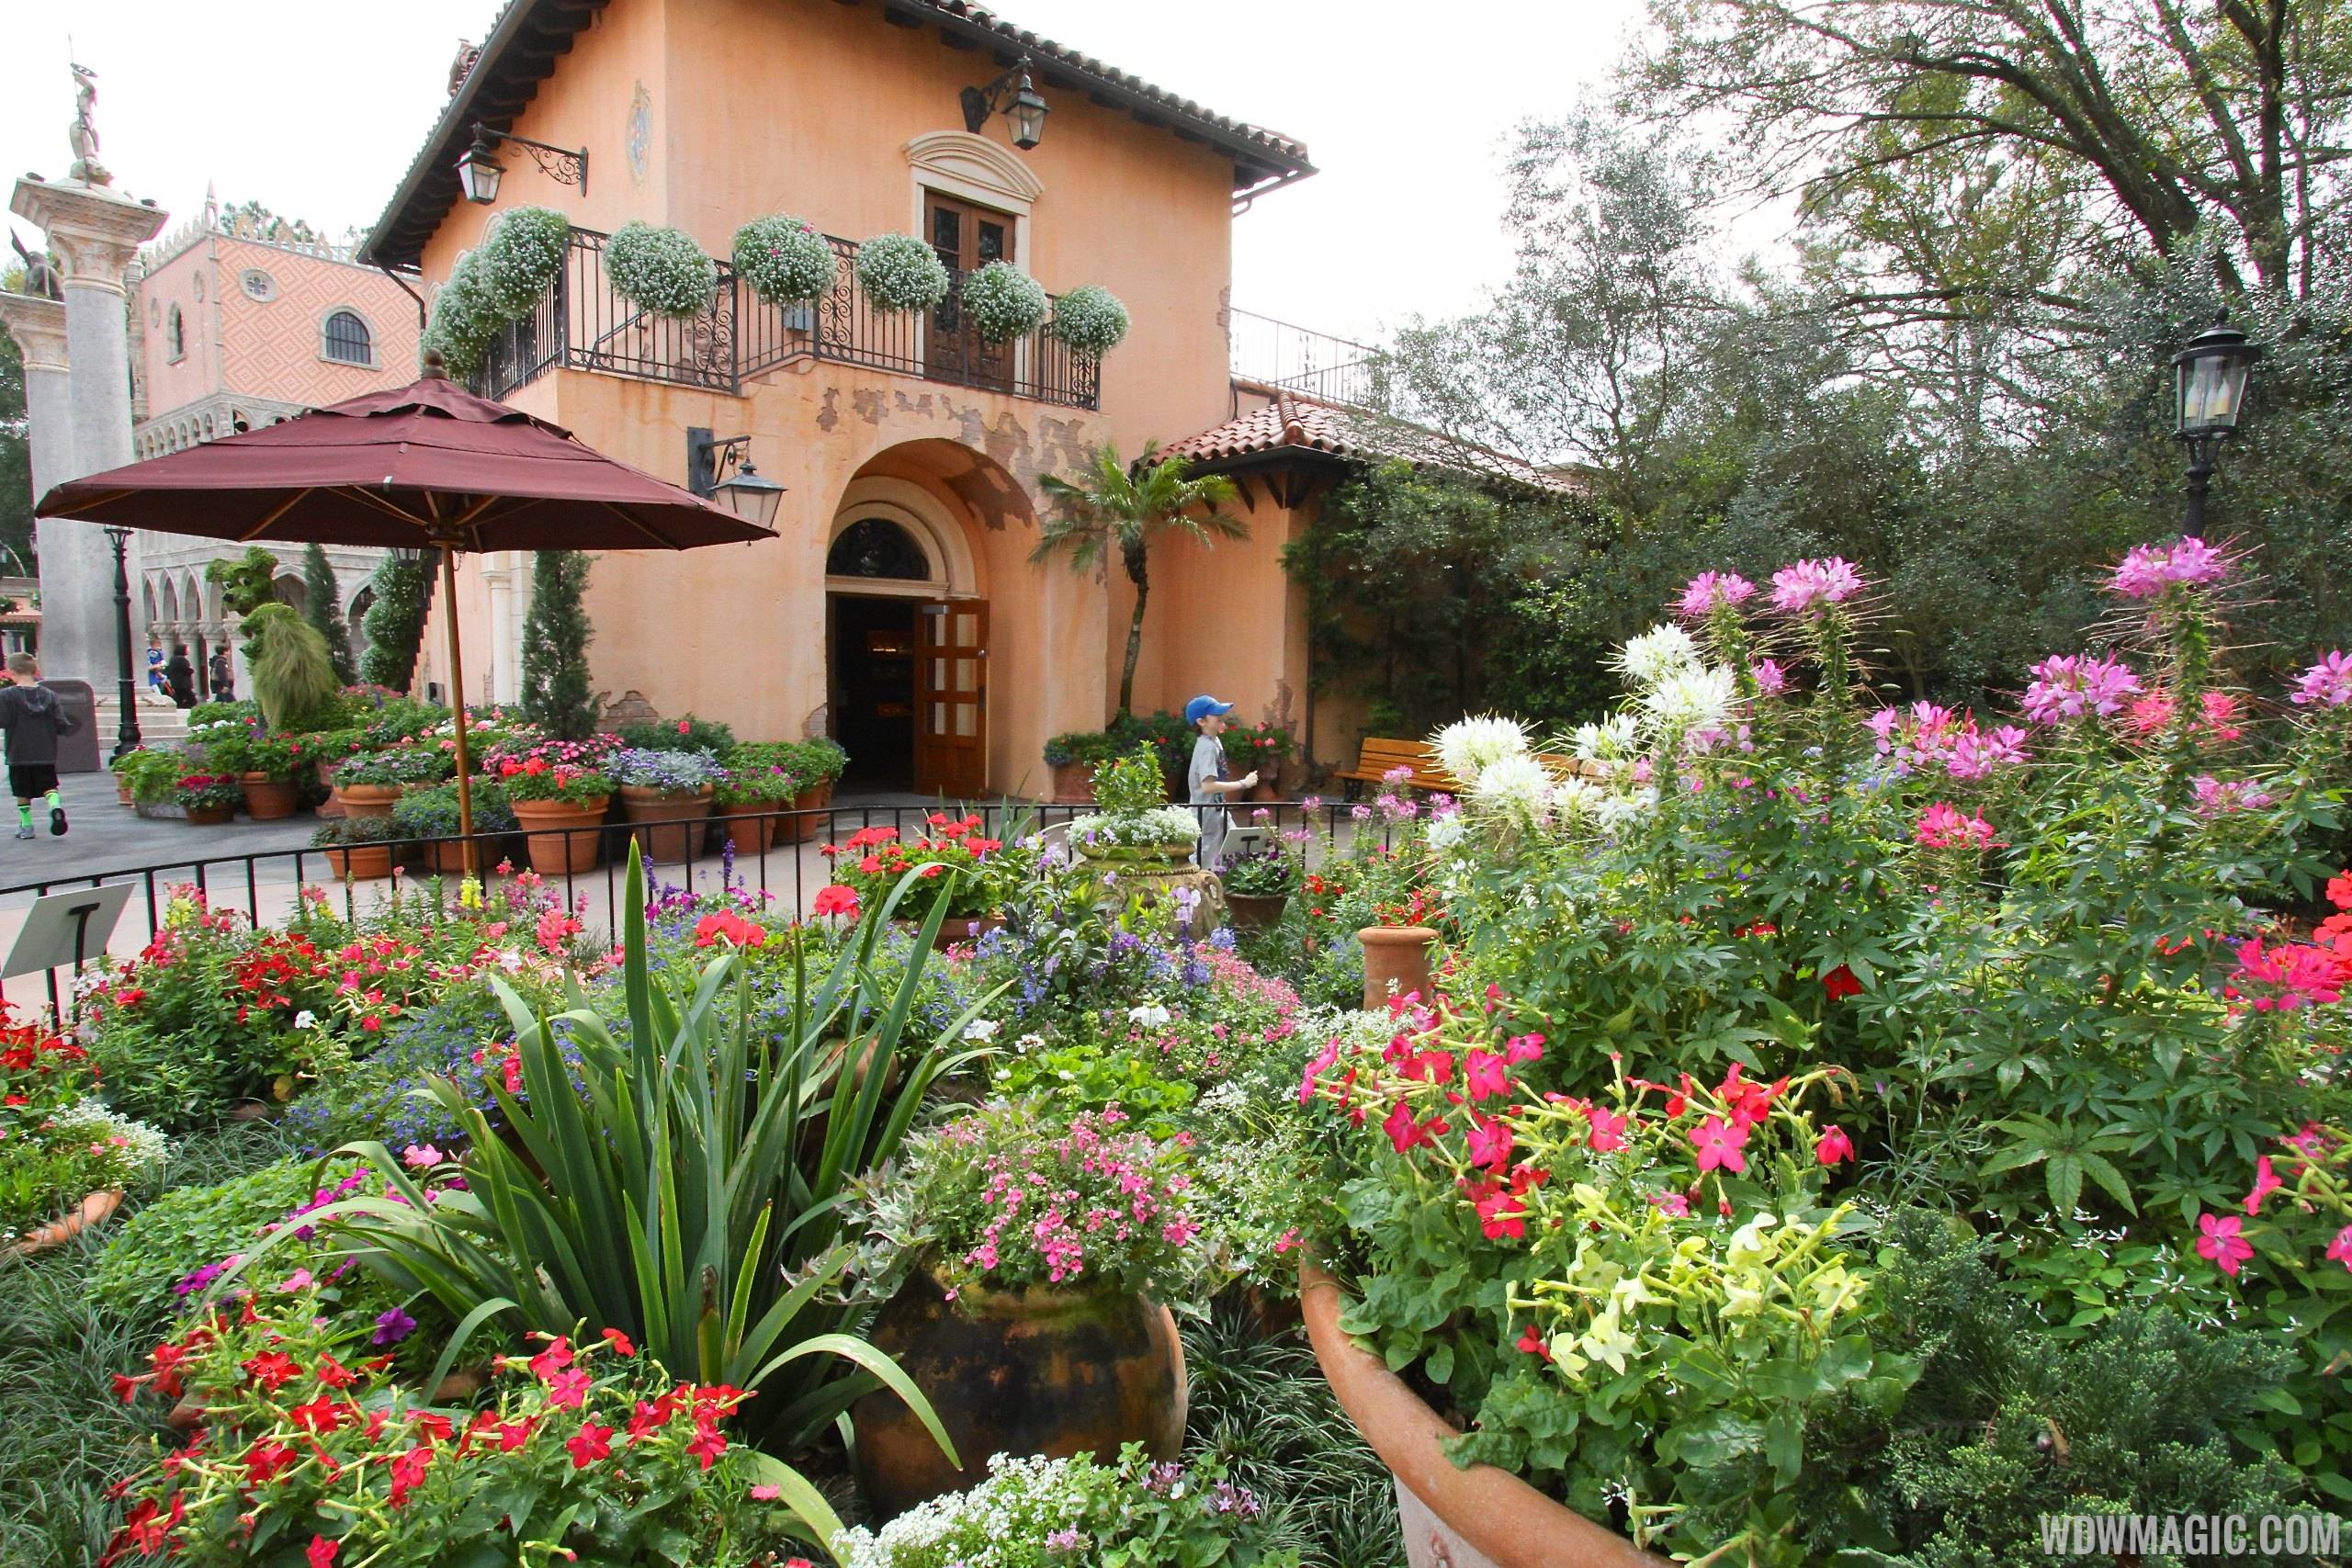 2014 Epcot Flower and Garden Festival - Italy Pavilion floral planters